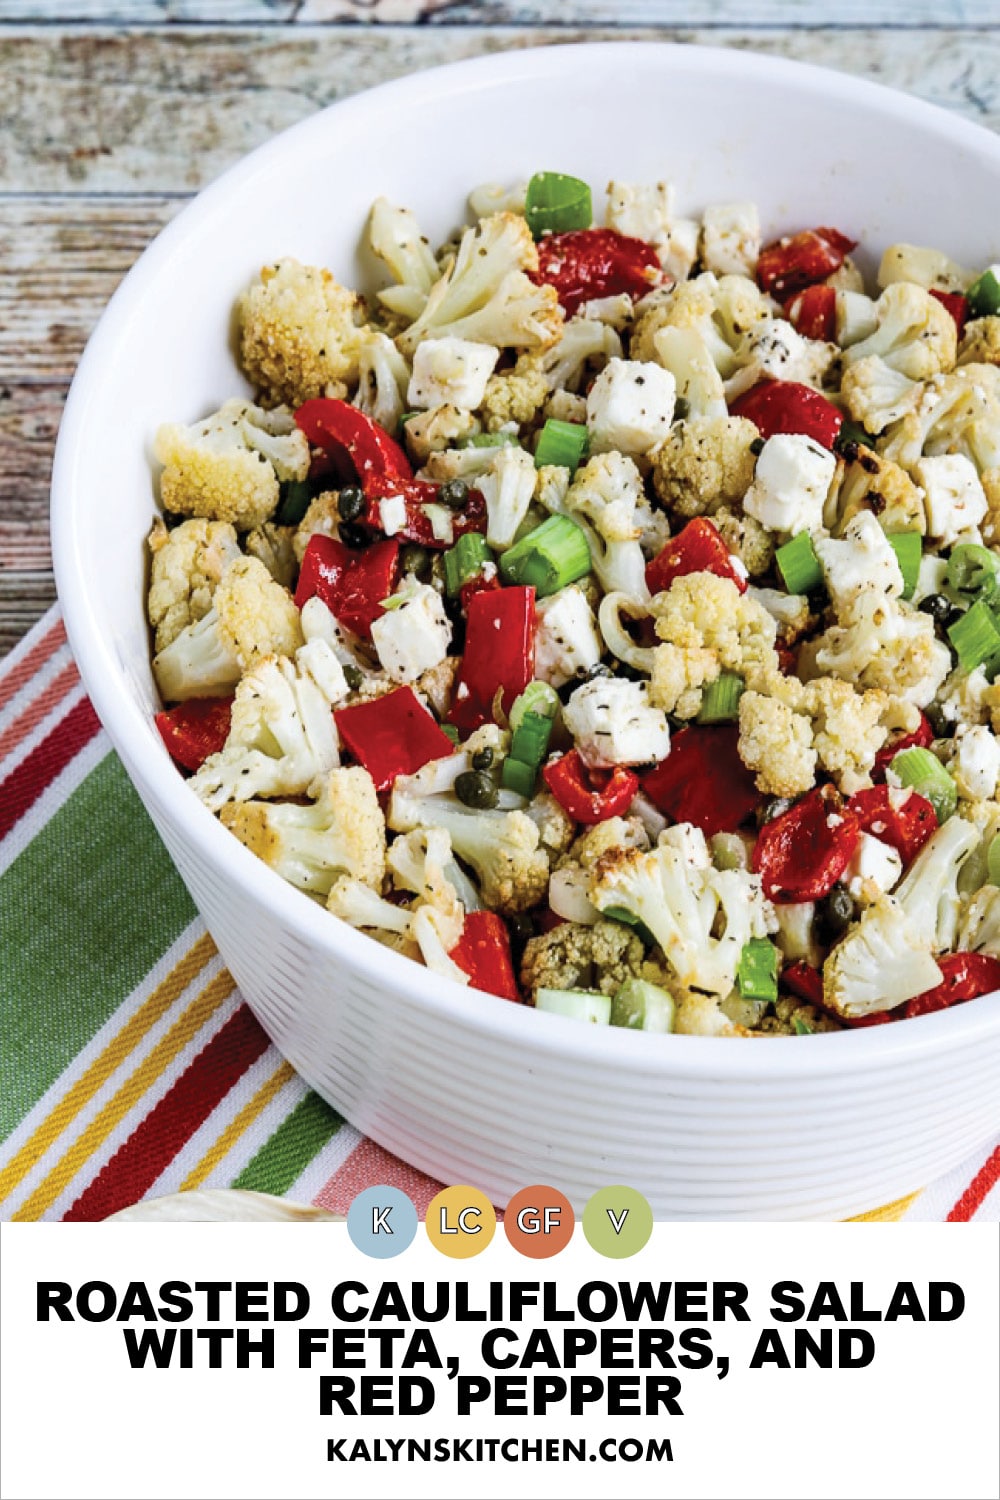 Pinterest image of Roasted Cauliflower Salad with Feta, Capers, and Red Pepper